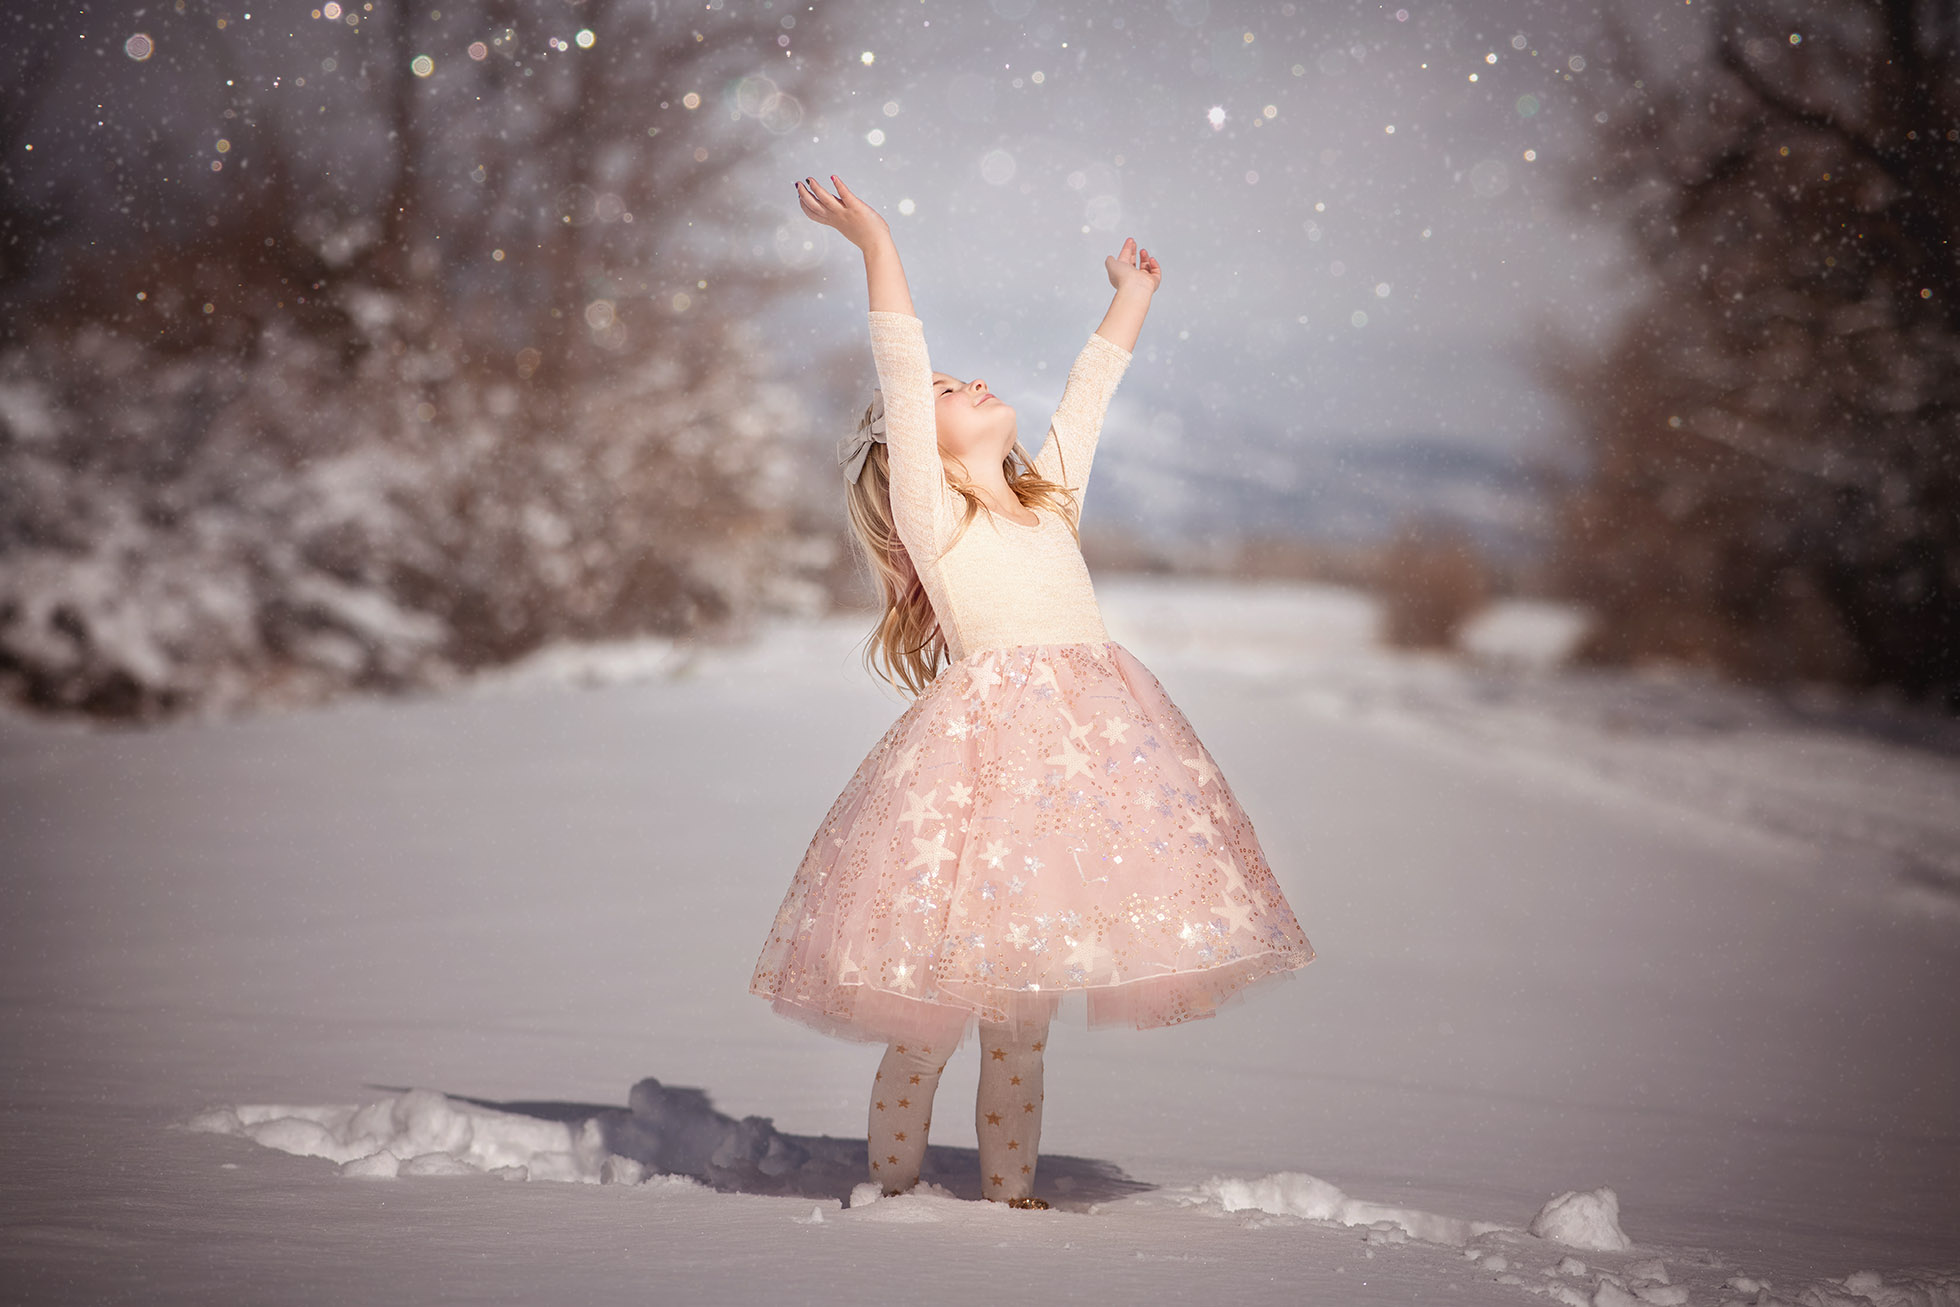 boulder's best child photographer - snowstorm with happy girl